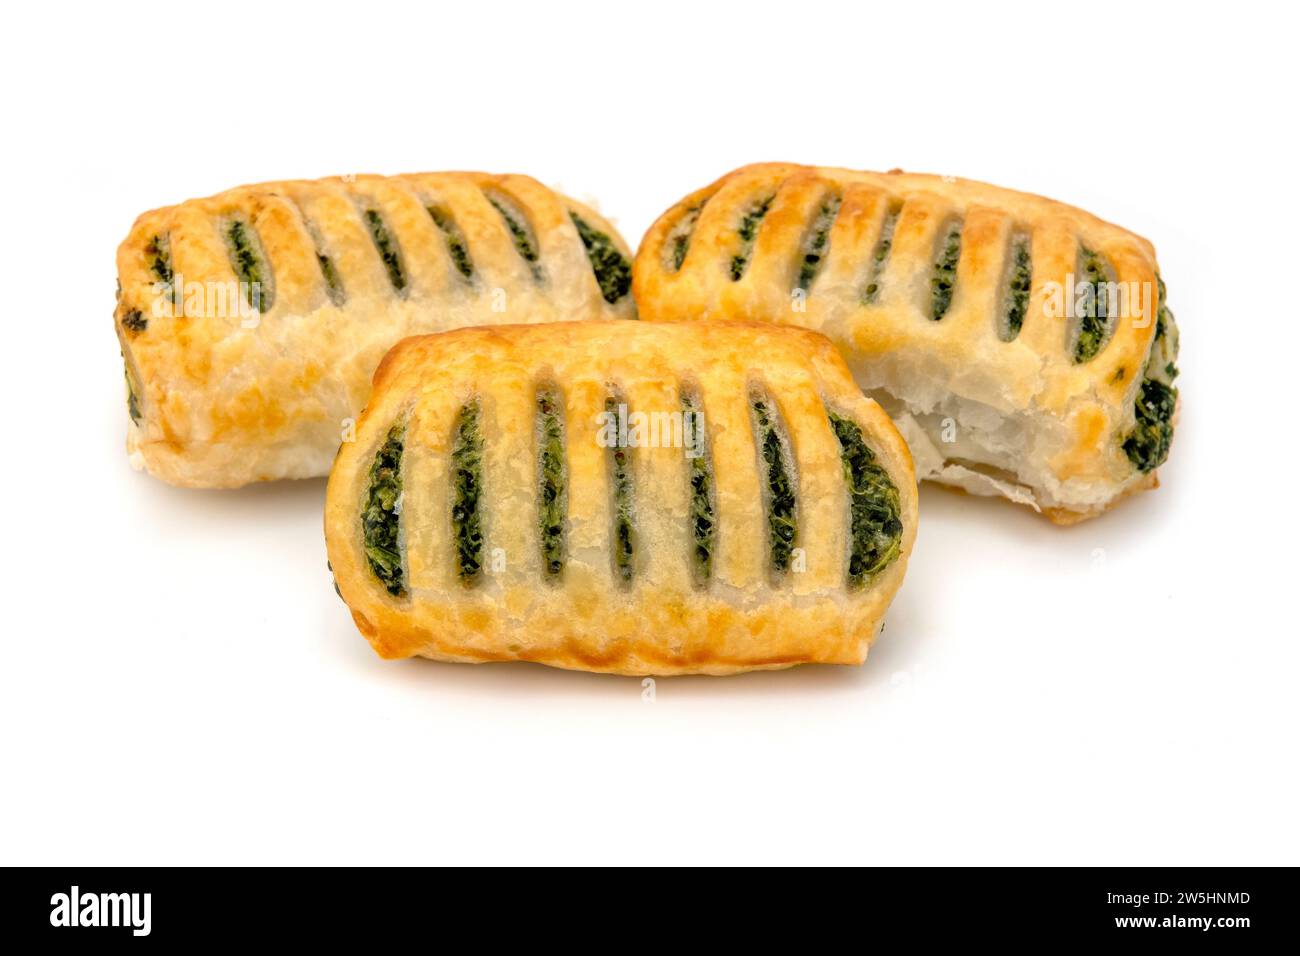 Puff pastry pies filled with spinach on a white background Stock Photo